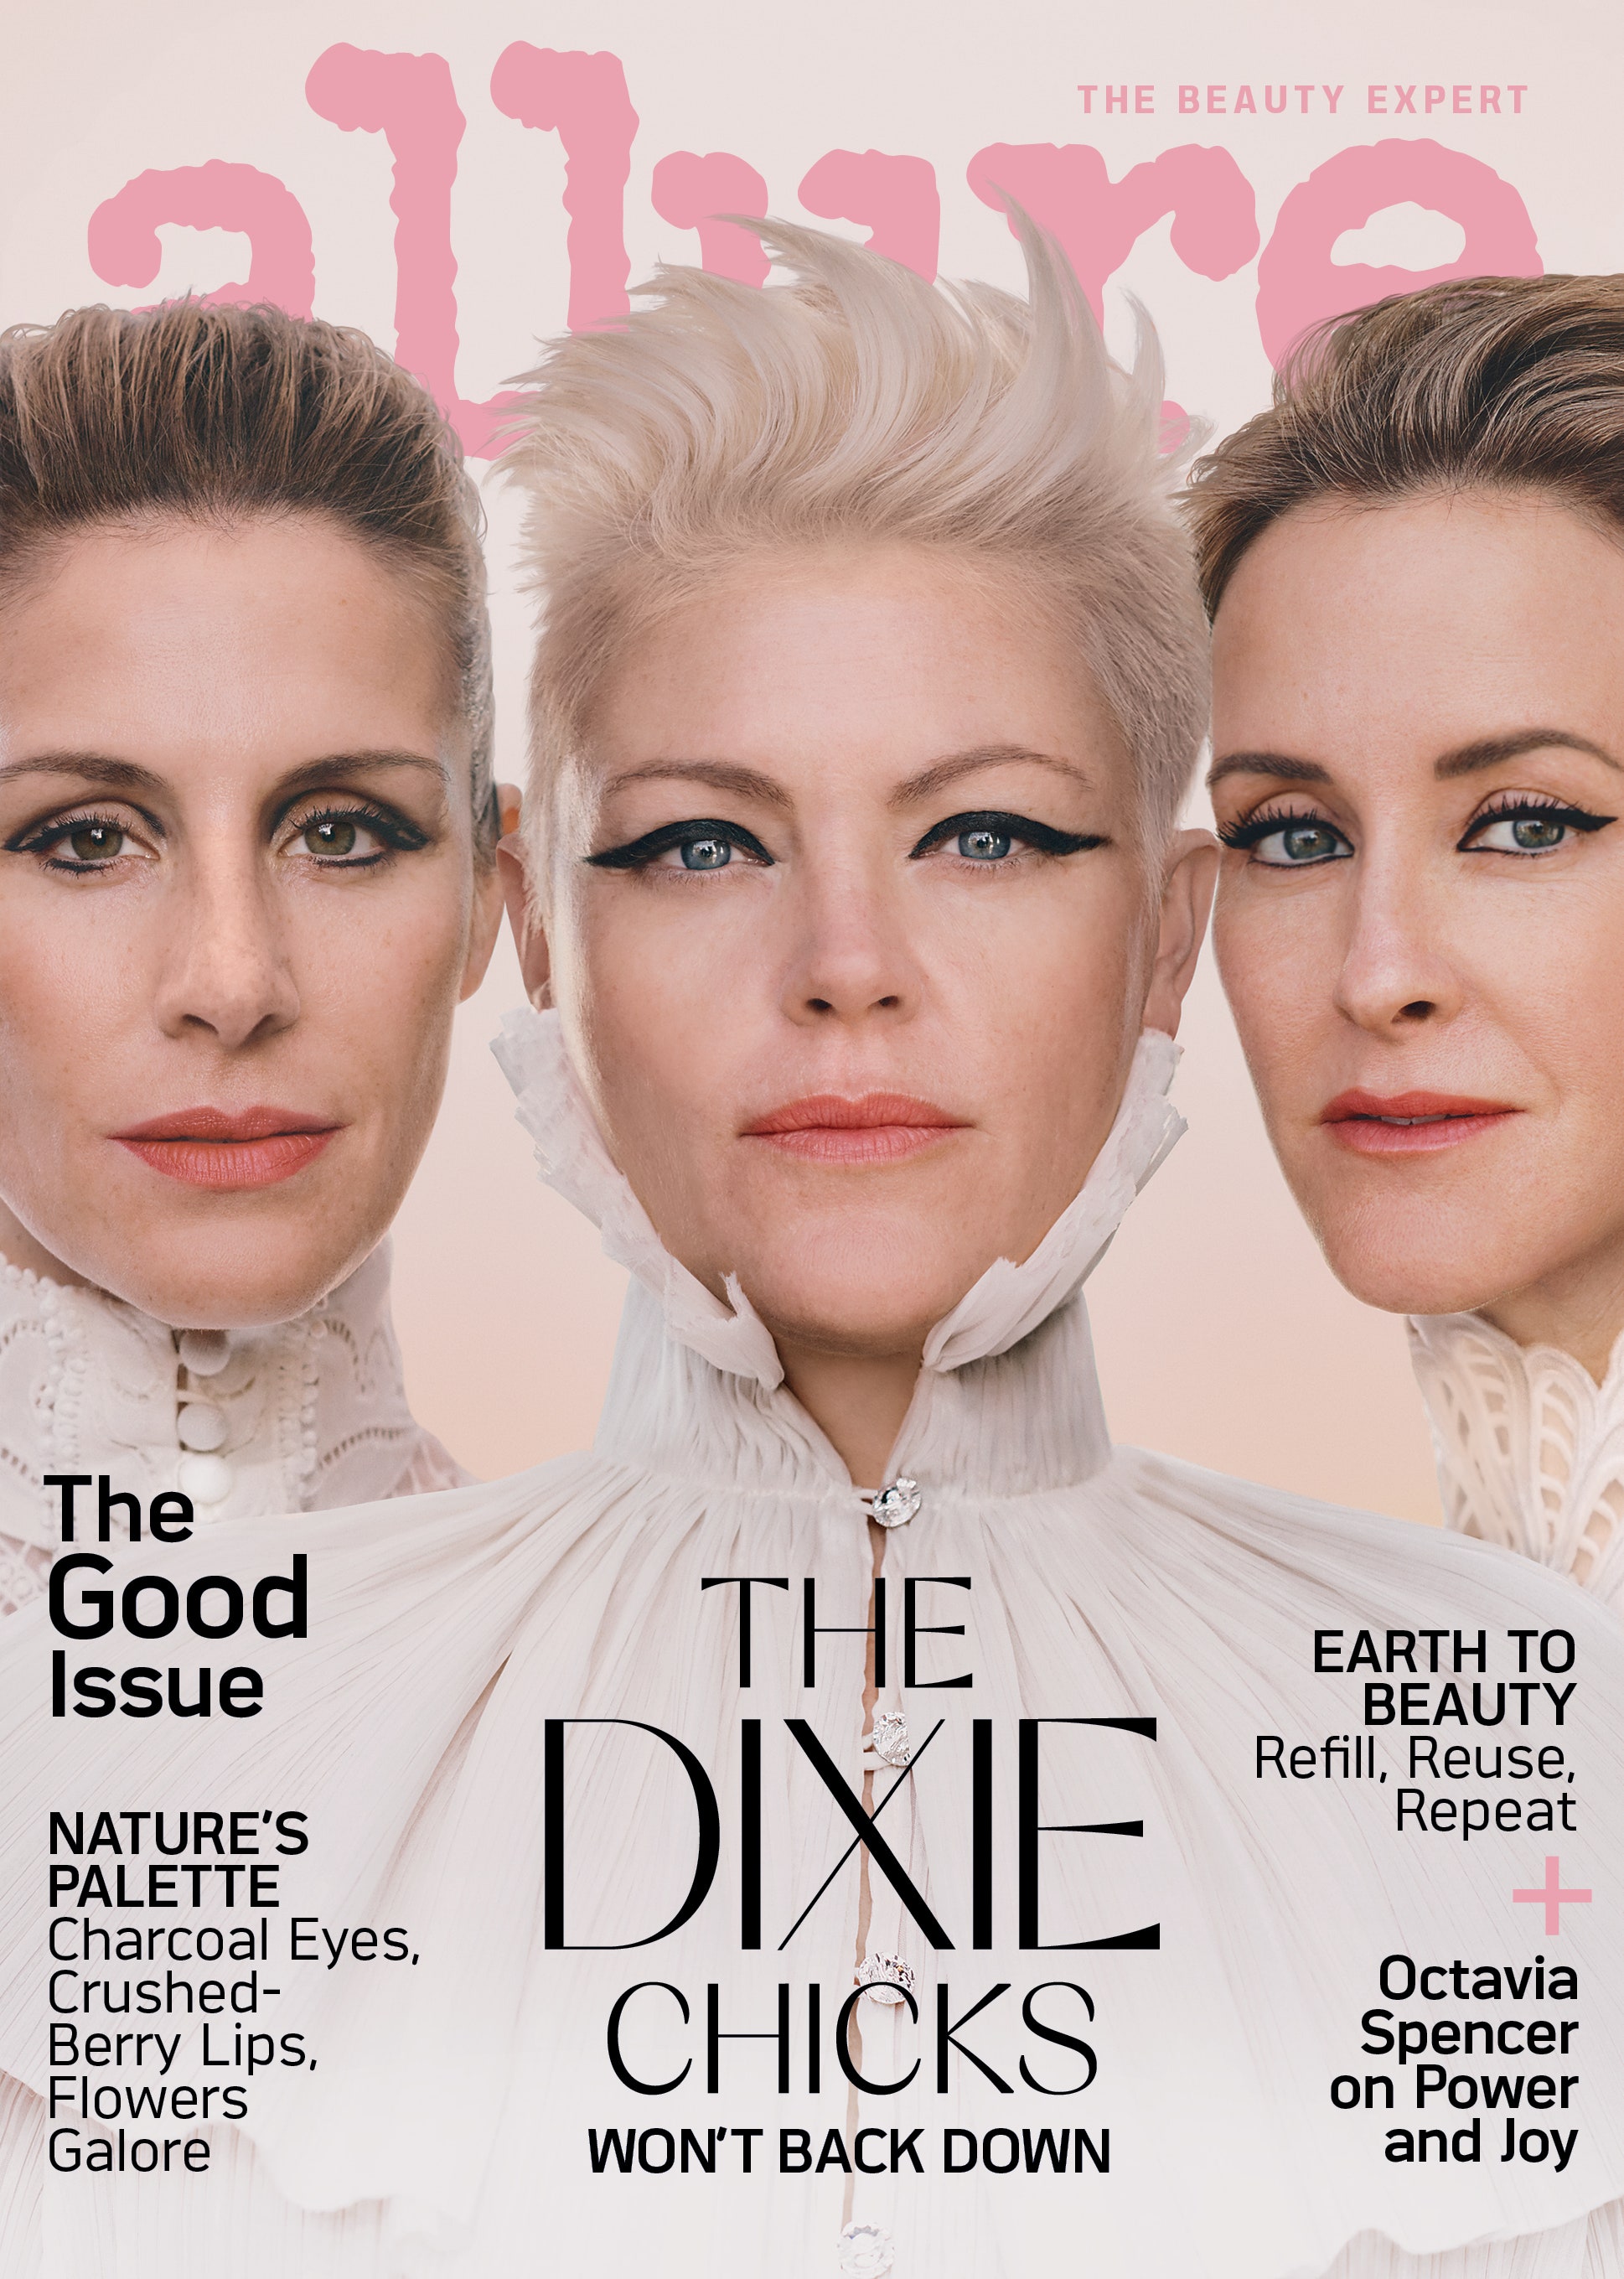 The Dixie Chicks: The Price of Being Genuine